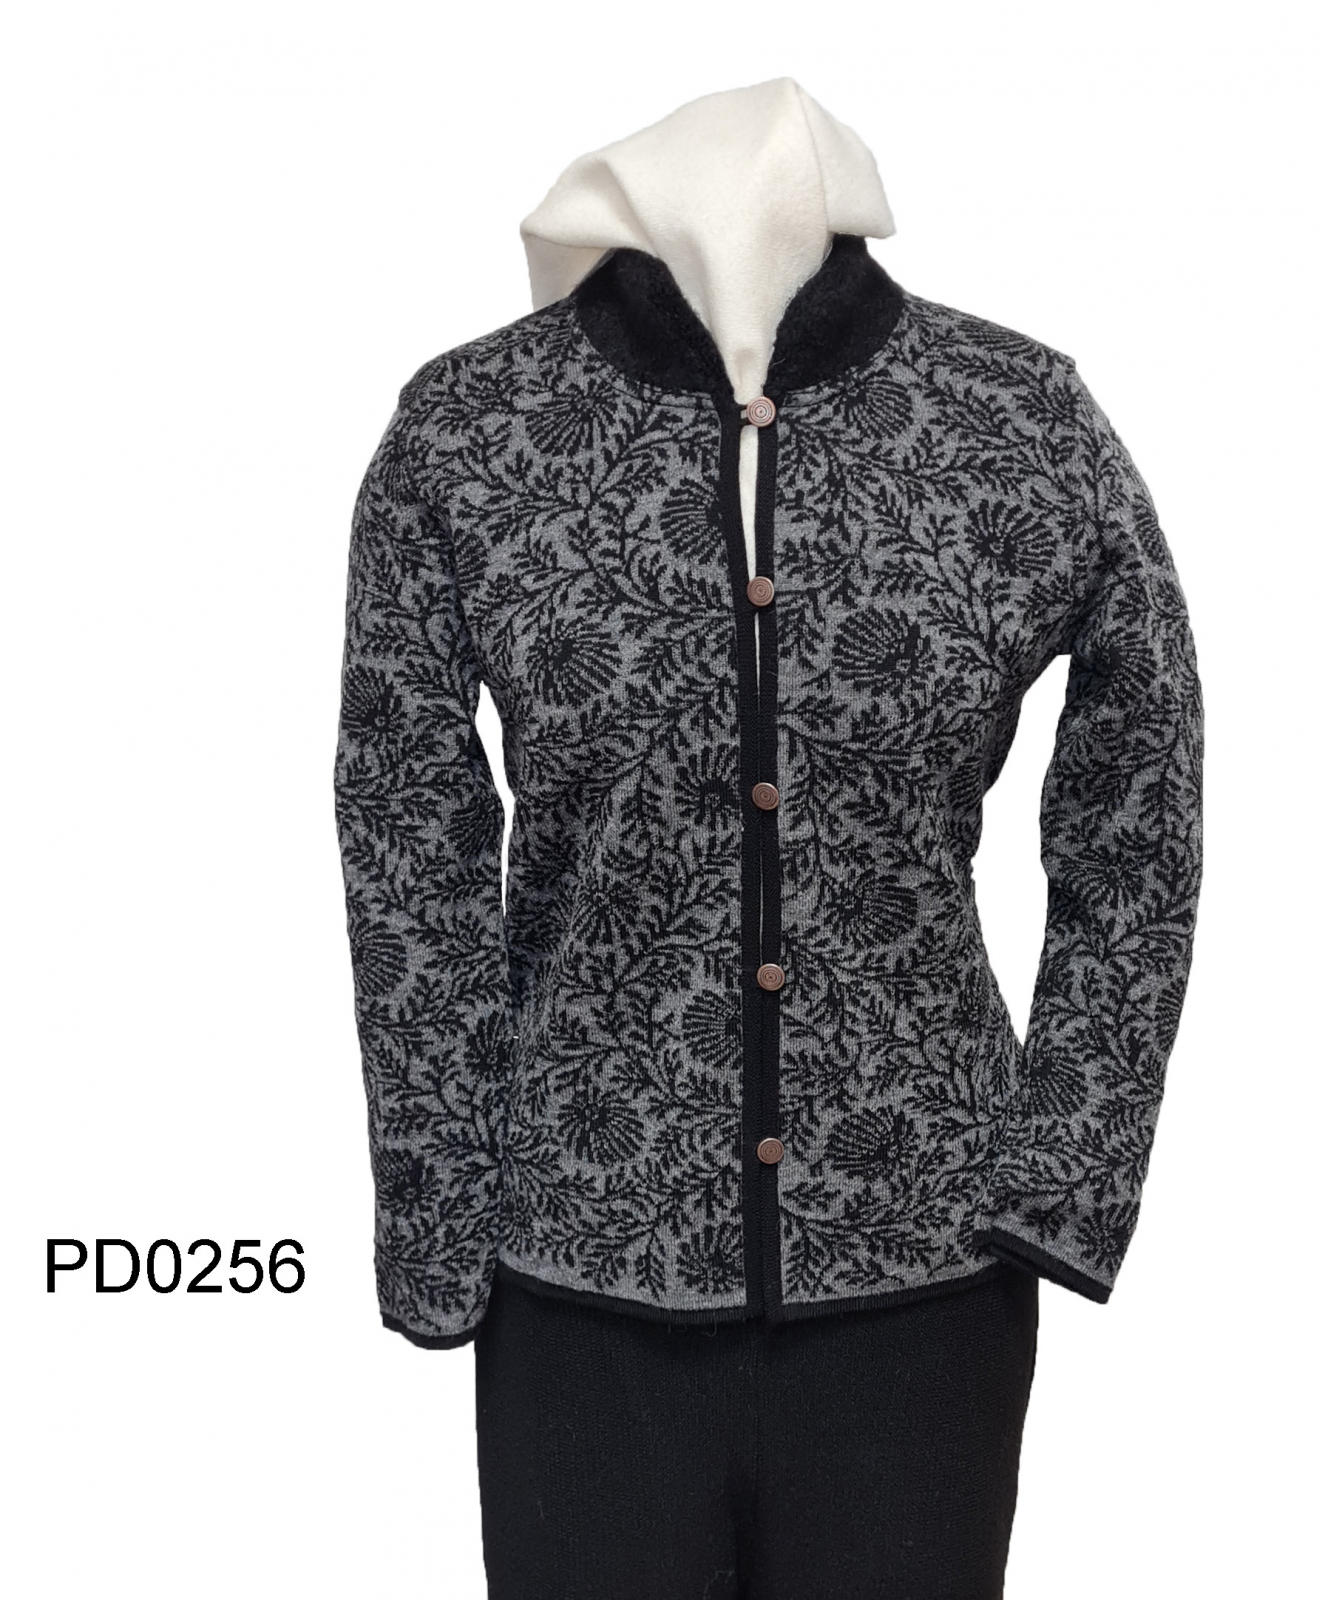 Women's Jacket with Collar 